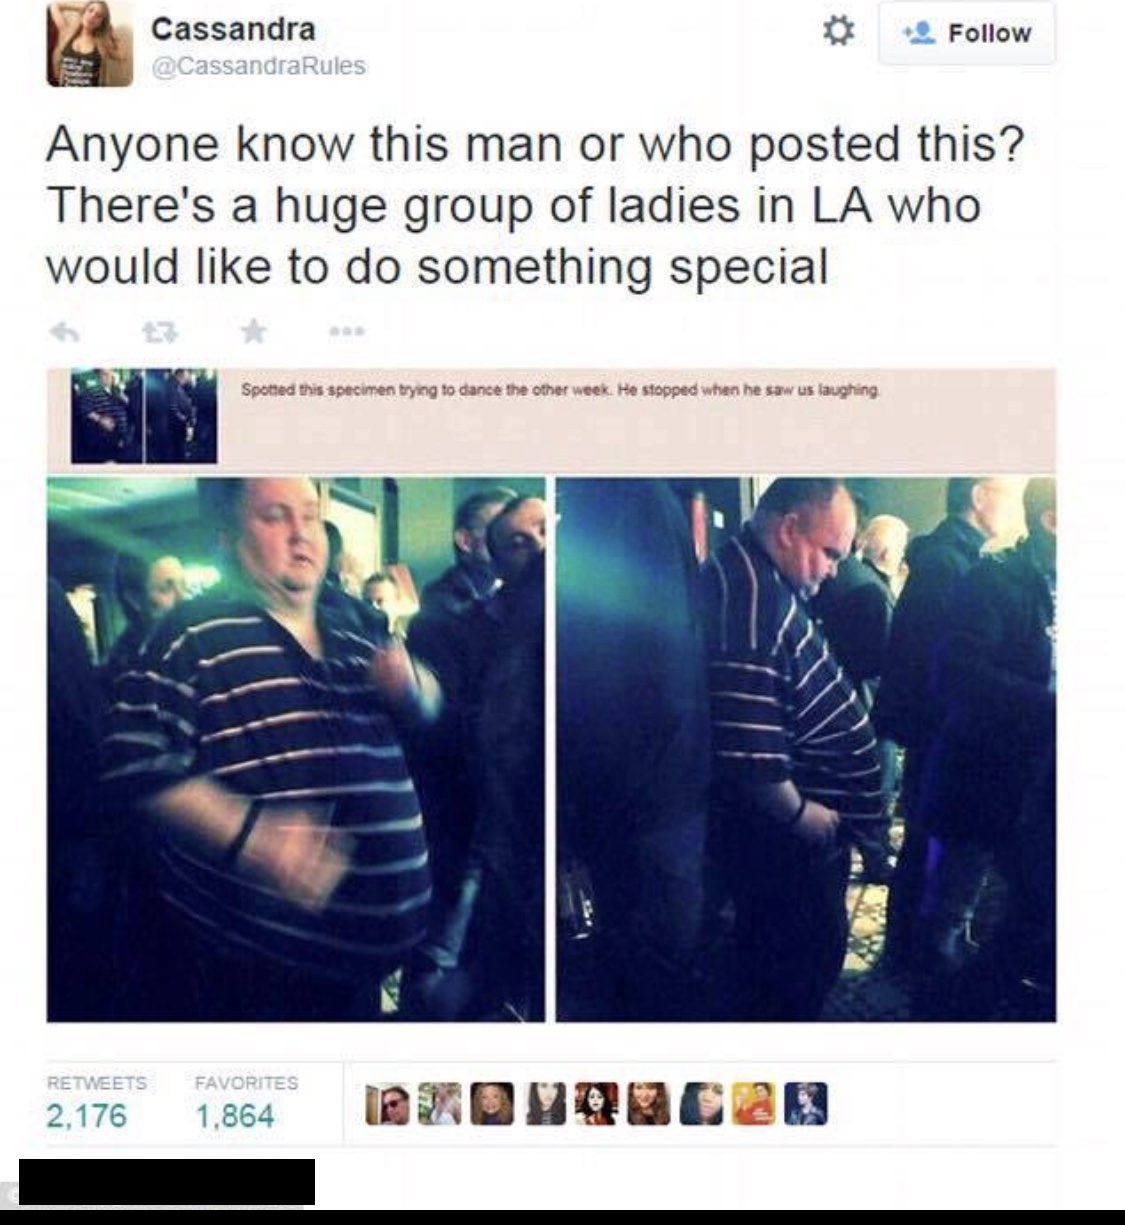 After the post gained some traction on the internet, a concerned twitter user reached out to try and track the man down.